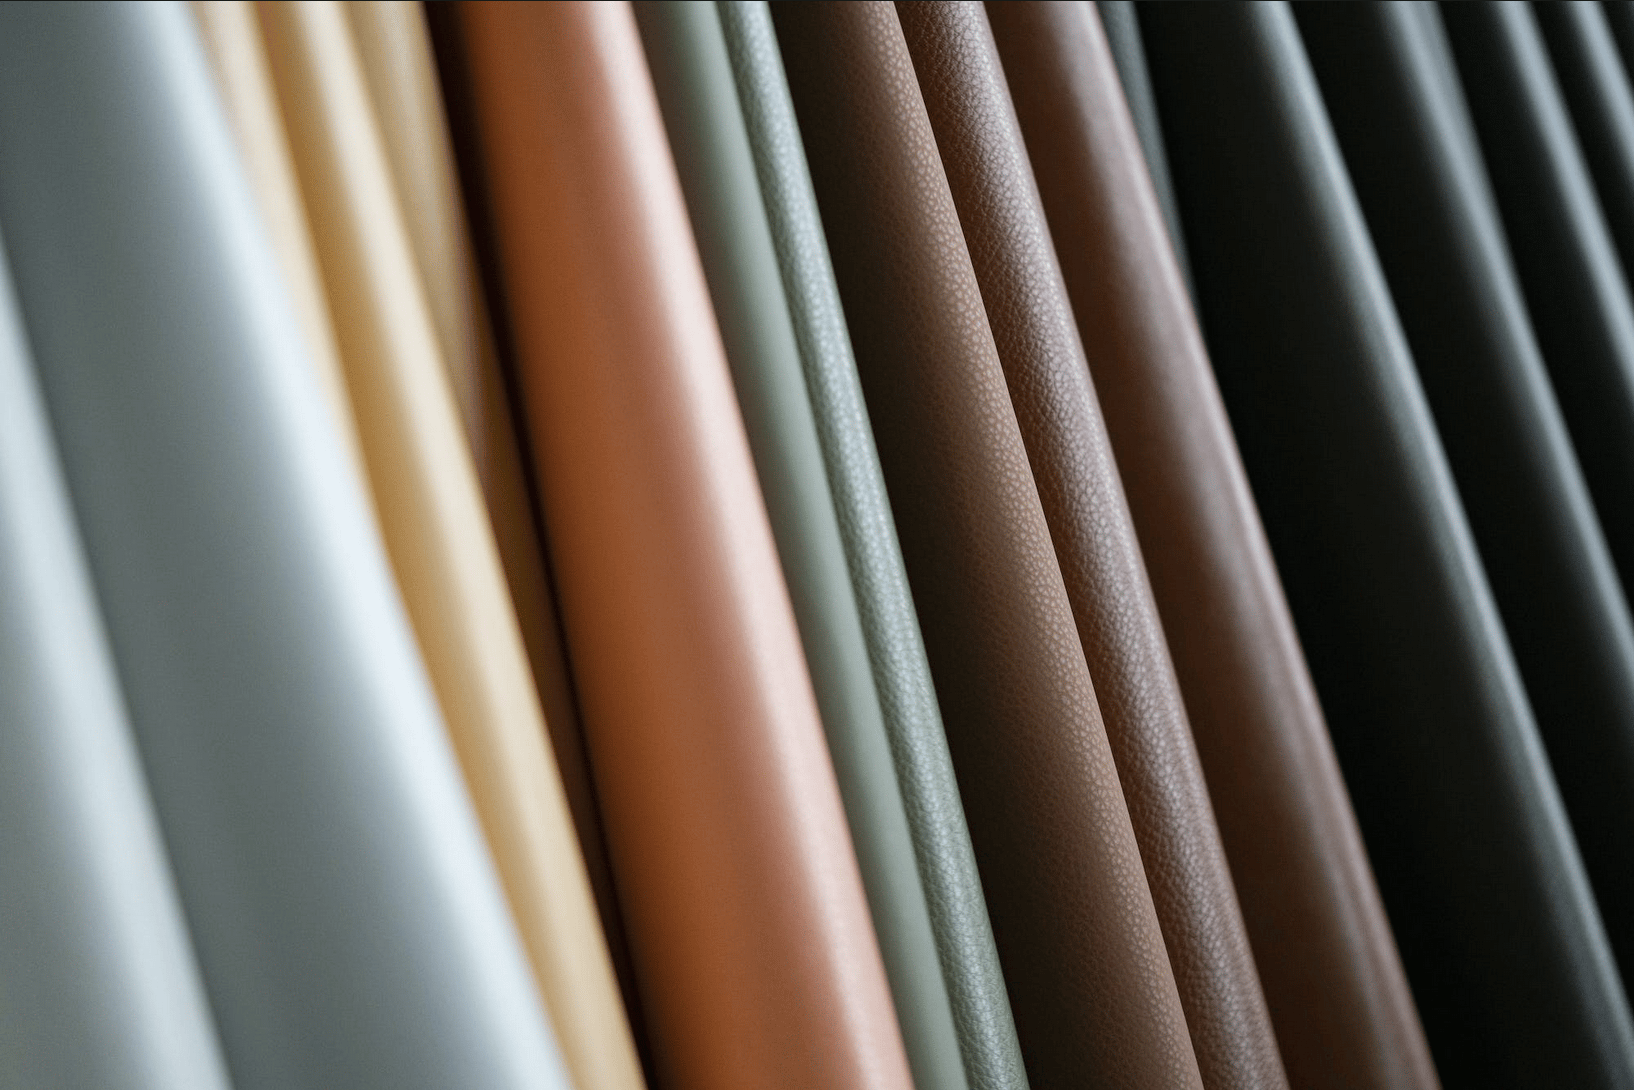 The Definitive List of the Vegan Leather Alternatives, Ranked - Ecocult®